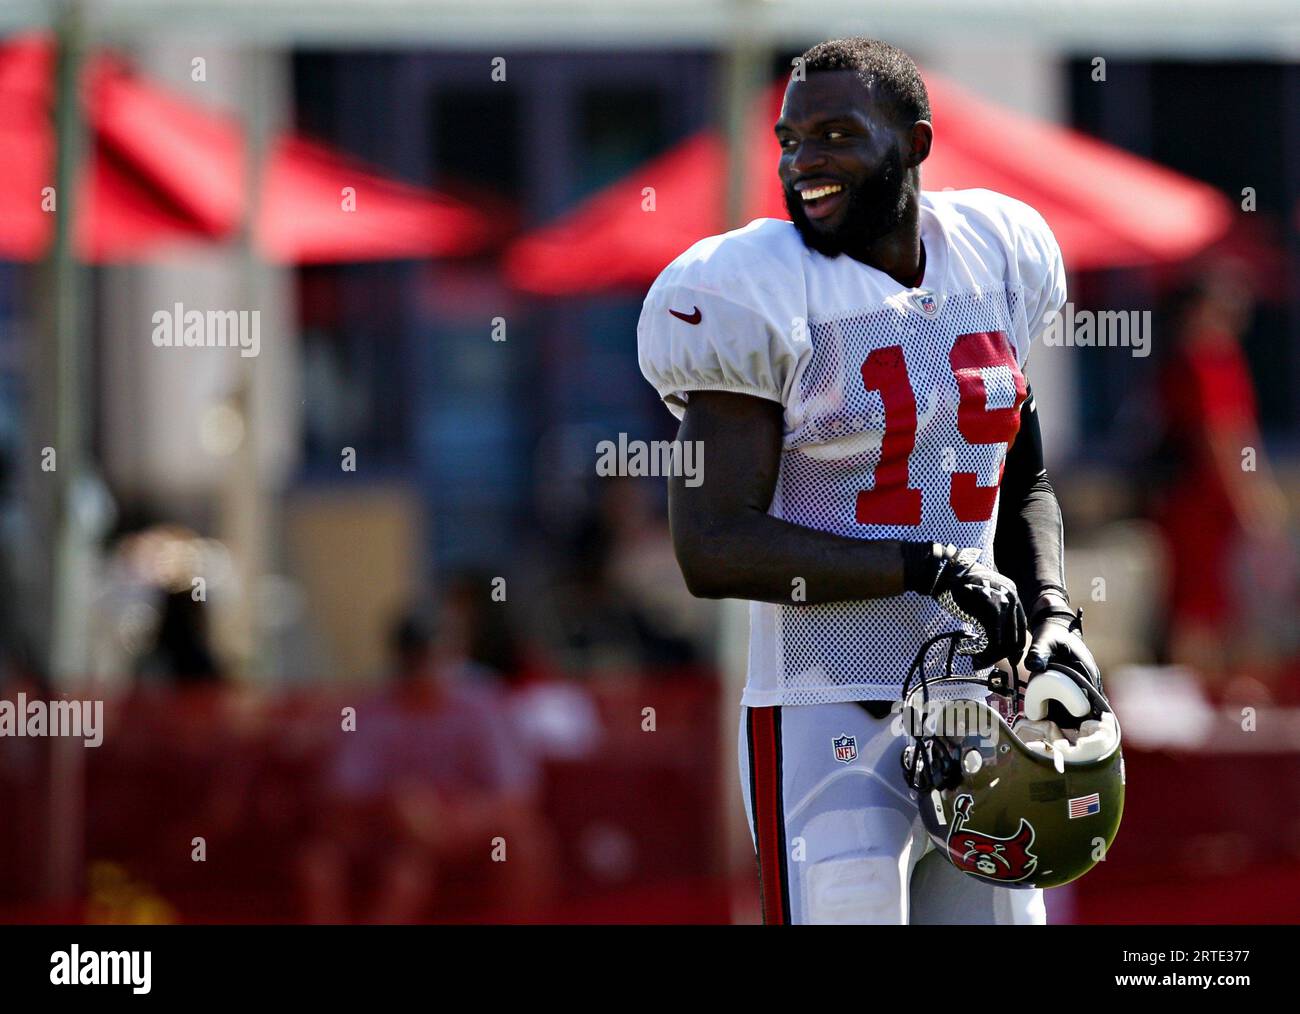 Tampa, USA. 29th July, 2013. Tampa Bay Buccaneers wide receiver Mike Williams (19) participates in practice during training camp on July 29, 2013. (Photo by Daniel Wallace/Tampa Bay Times/TNS/Sipa USA) Credit: Sipa USA/Alamy Live News Stock Photo